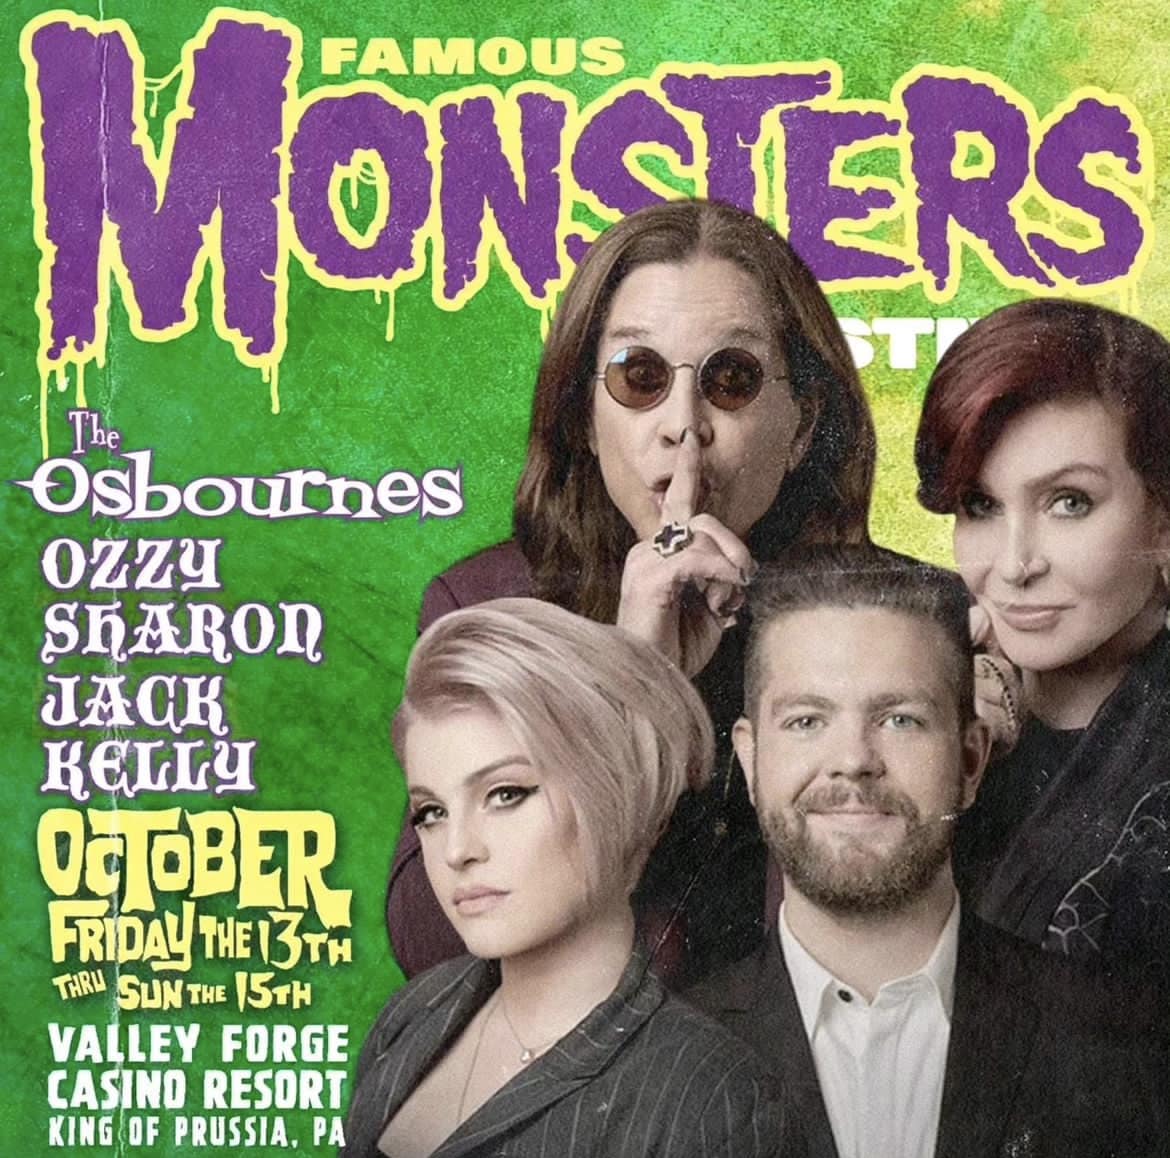 The Osbournes: The Ultimate Sin packages